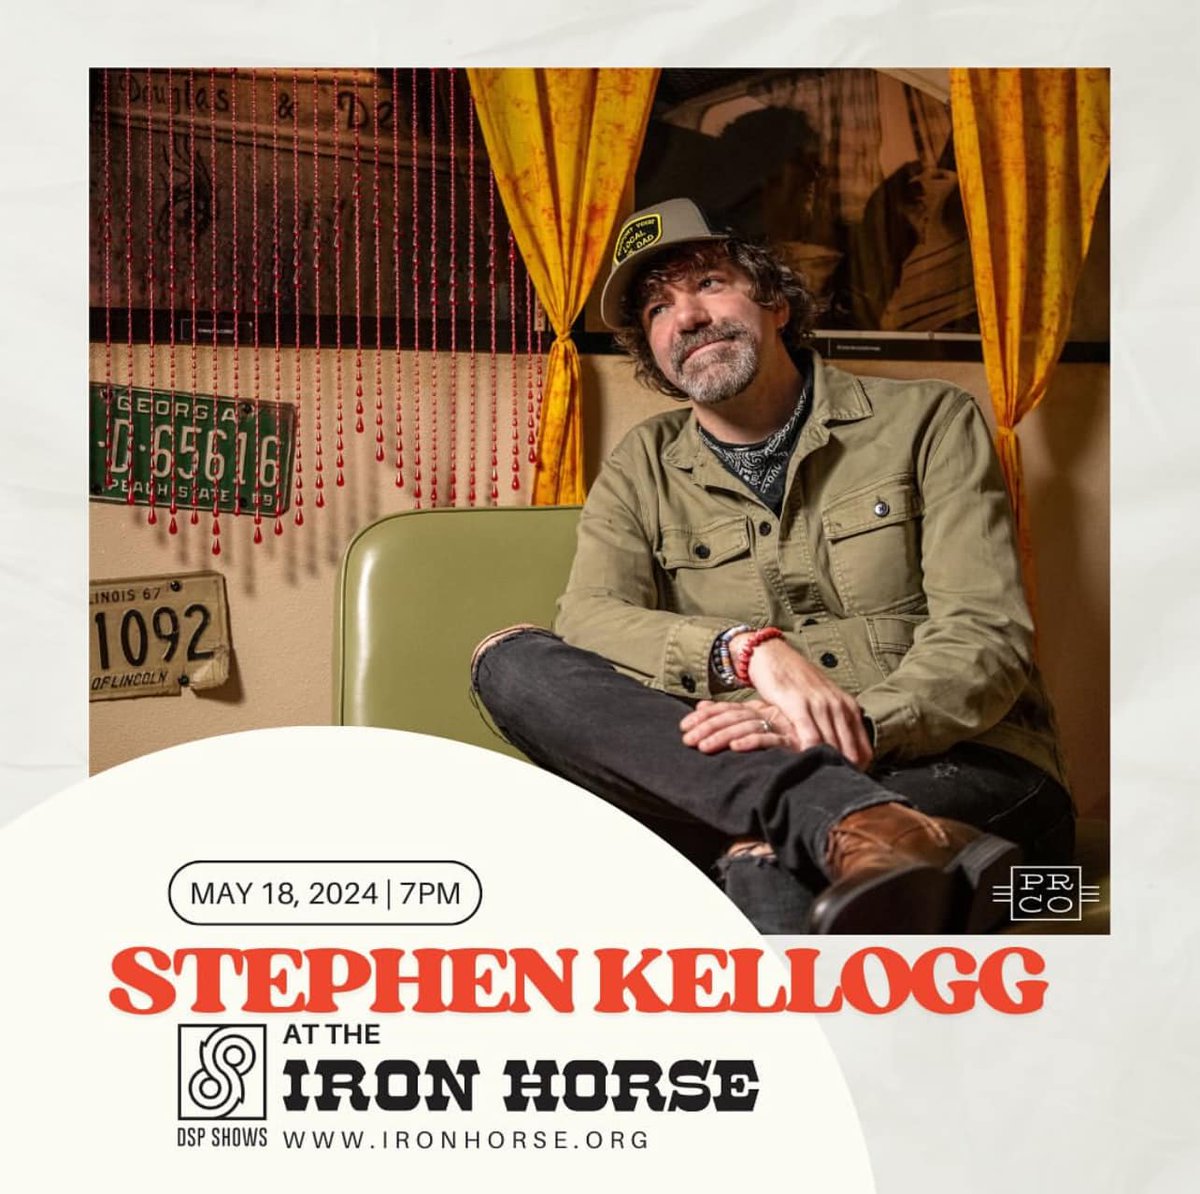 SK will be in Northampton, MA this Saturday, May 18th as part of their grand re-opening. We love this space, and can't wait to see you there on Saturday. About 25 tickets left! Tickets + VIP at stephenkellogg.com/tour